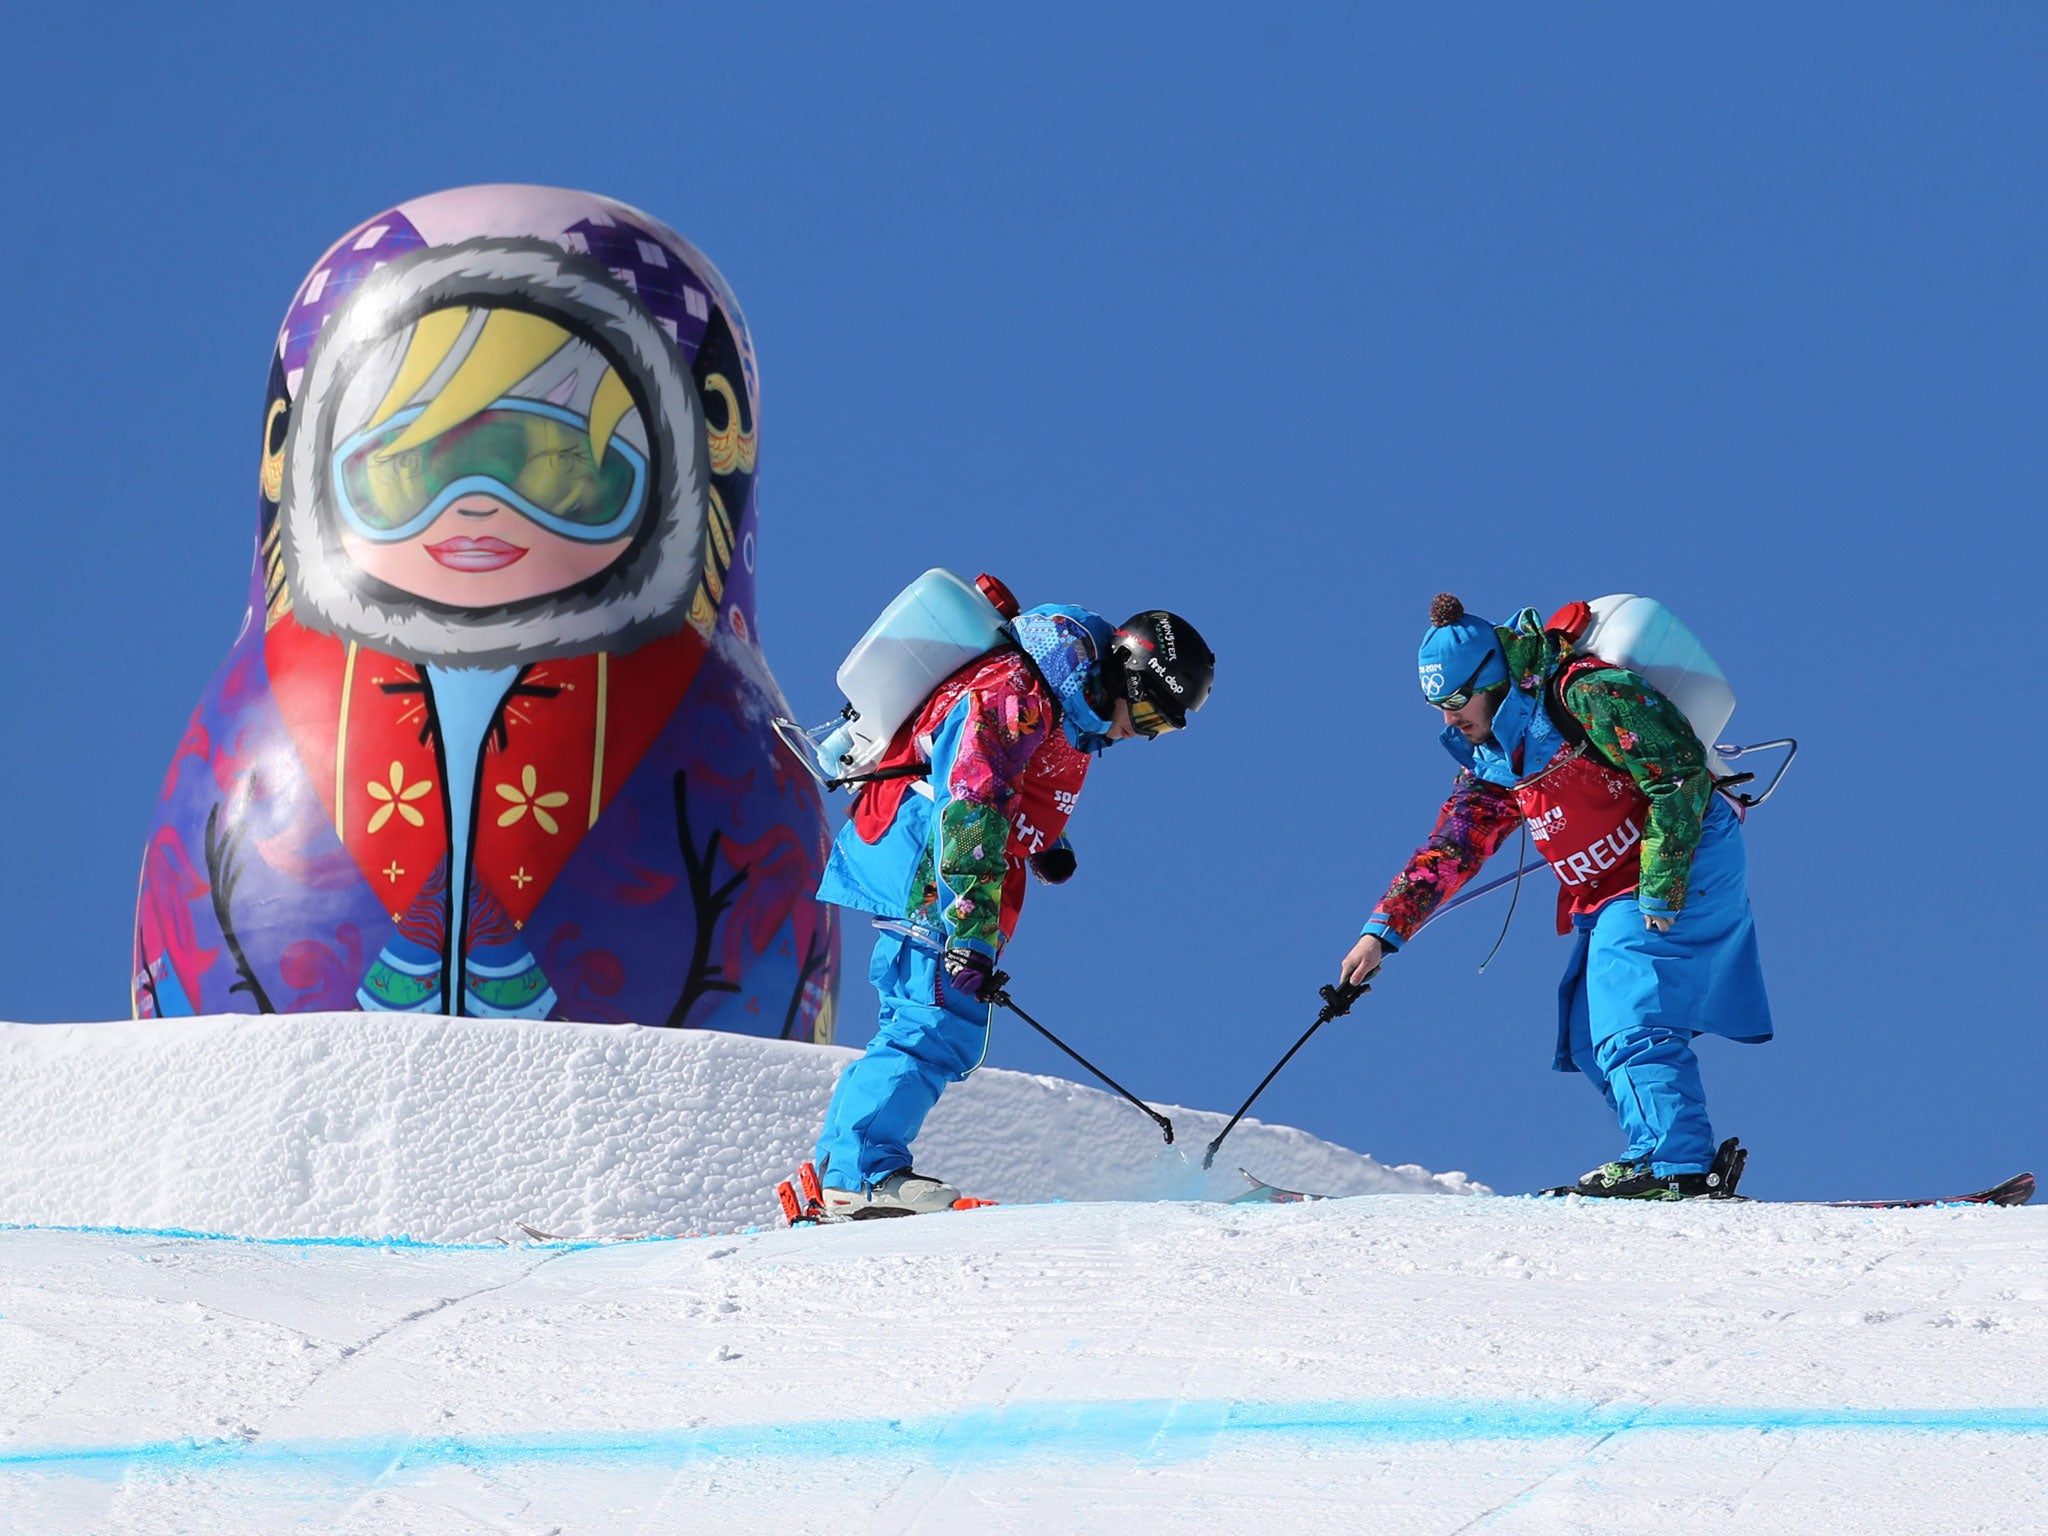 Workers spray paint on the slopestyle course at the Rosa Khutor Extreme Park